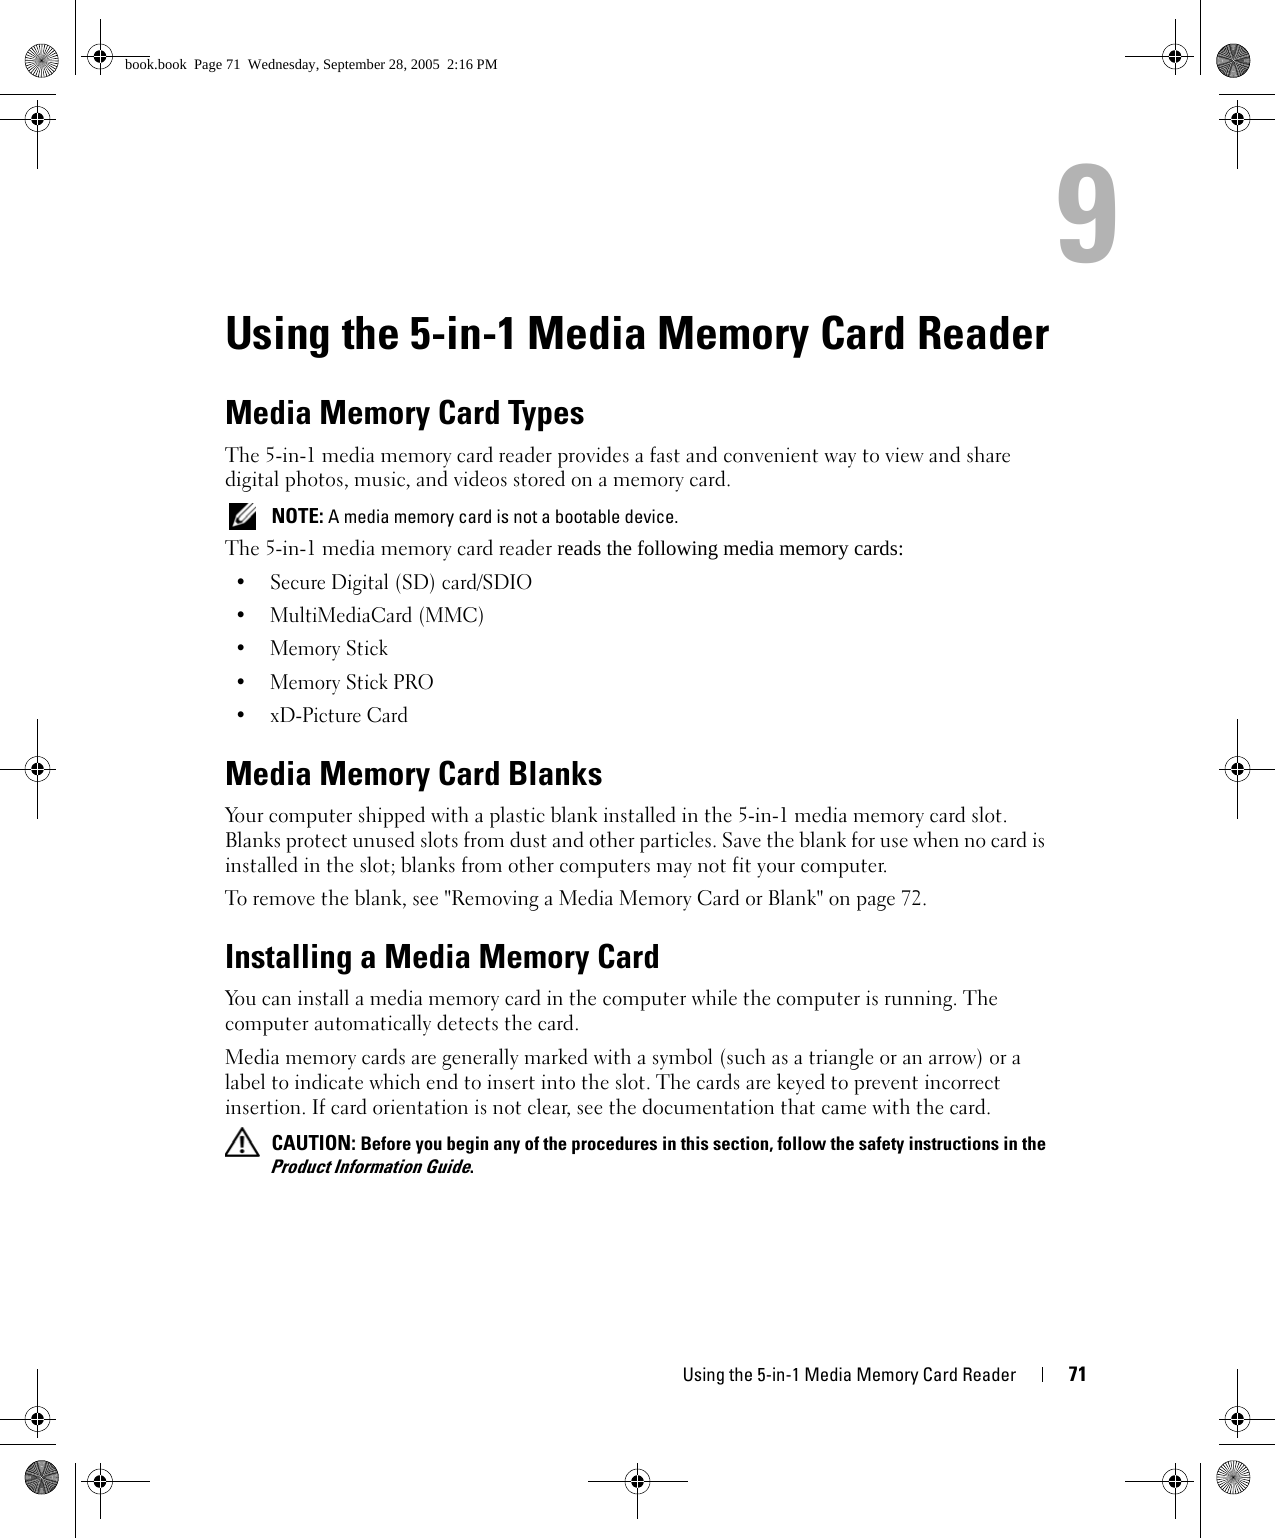 Using the 5-in-1 Media Memory Card Reader 719Using the 5-in-1 Media Memory Card ReaderMedia Memory Card TypesThe 5-in-1 media memory card reader provides a fast and convenient way to view and share digital photos, music, and videos stored on a memory card.  NOTE: A media memory card is not a bootable device.The 5-in-1 media memory card reader reads the following media memory cards:• Secure Digital (SD) card/SDIO• MultiMediaCard (MMC)•Memory Stick •Memory Stick PRO •xD-Picture Card Media Memory Card BlanksYour computer shipped with a plastic blank installed in the 5-in-1 media memory card slot. Blanks protect unused slots from dust and other particles. Save the blank for use when no card is installed in the slot; blanks from other computers may not fit your computer.To remove the blank, see &quot;Removing a Media Memory Card or Blank&quot; on page 72.Installing a Media Memory CardYou can install a media memory card in the computer while the computer is running. The computer automatically detects the card.Media memory cards are generally marked with a symbol (such as a triangle or an arrow) or a label to indicate which end to insert into the slot. The cards are keyed to prevent incorrect insertion. If card orientation is not clear, see the documentation that came with the card.  CAUTION: Before you begin any of the procedures in this section, follow the safety instructions in the Product Information Guide.book.book  Page 71  Wednesday, September 28, 2005  2:16 PM